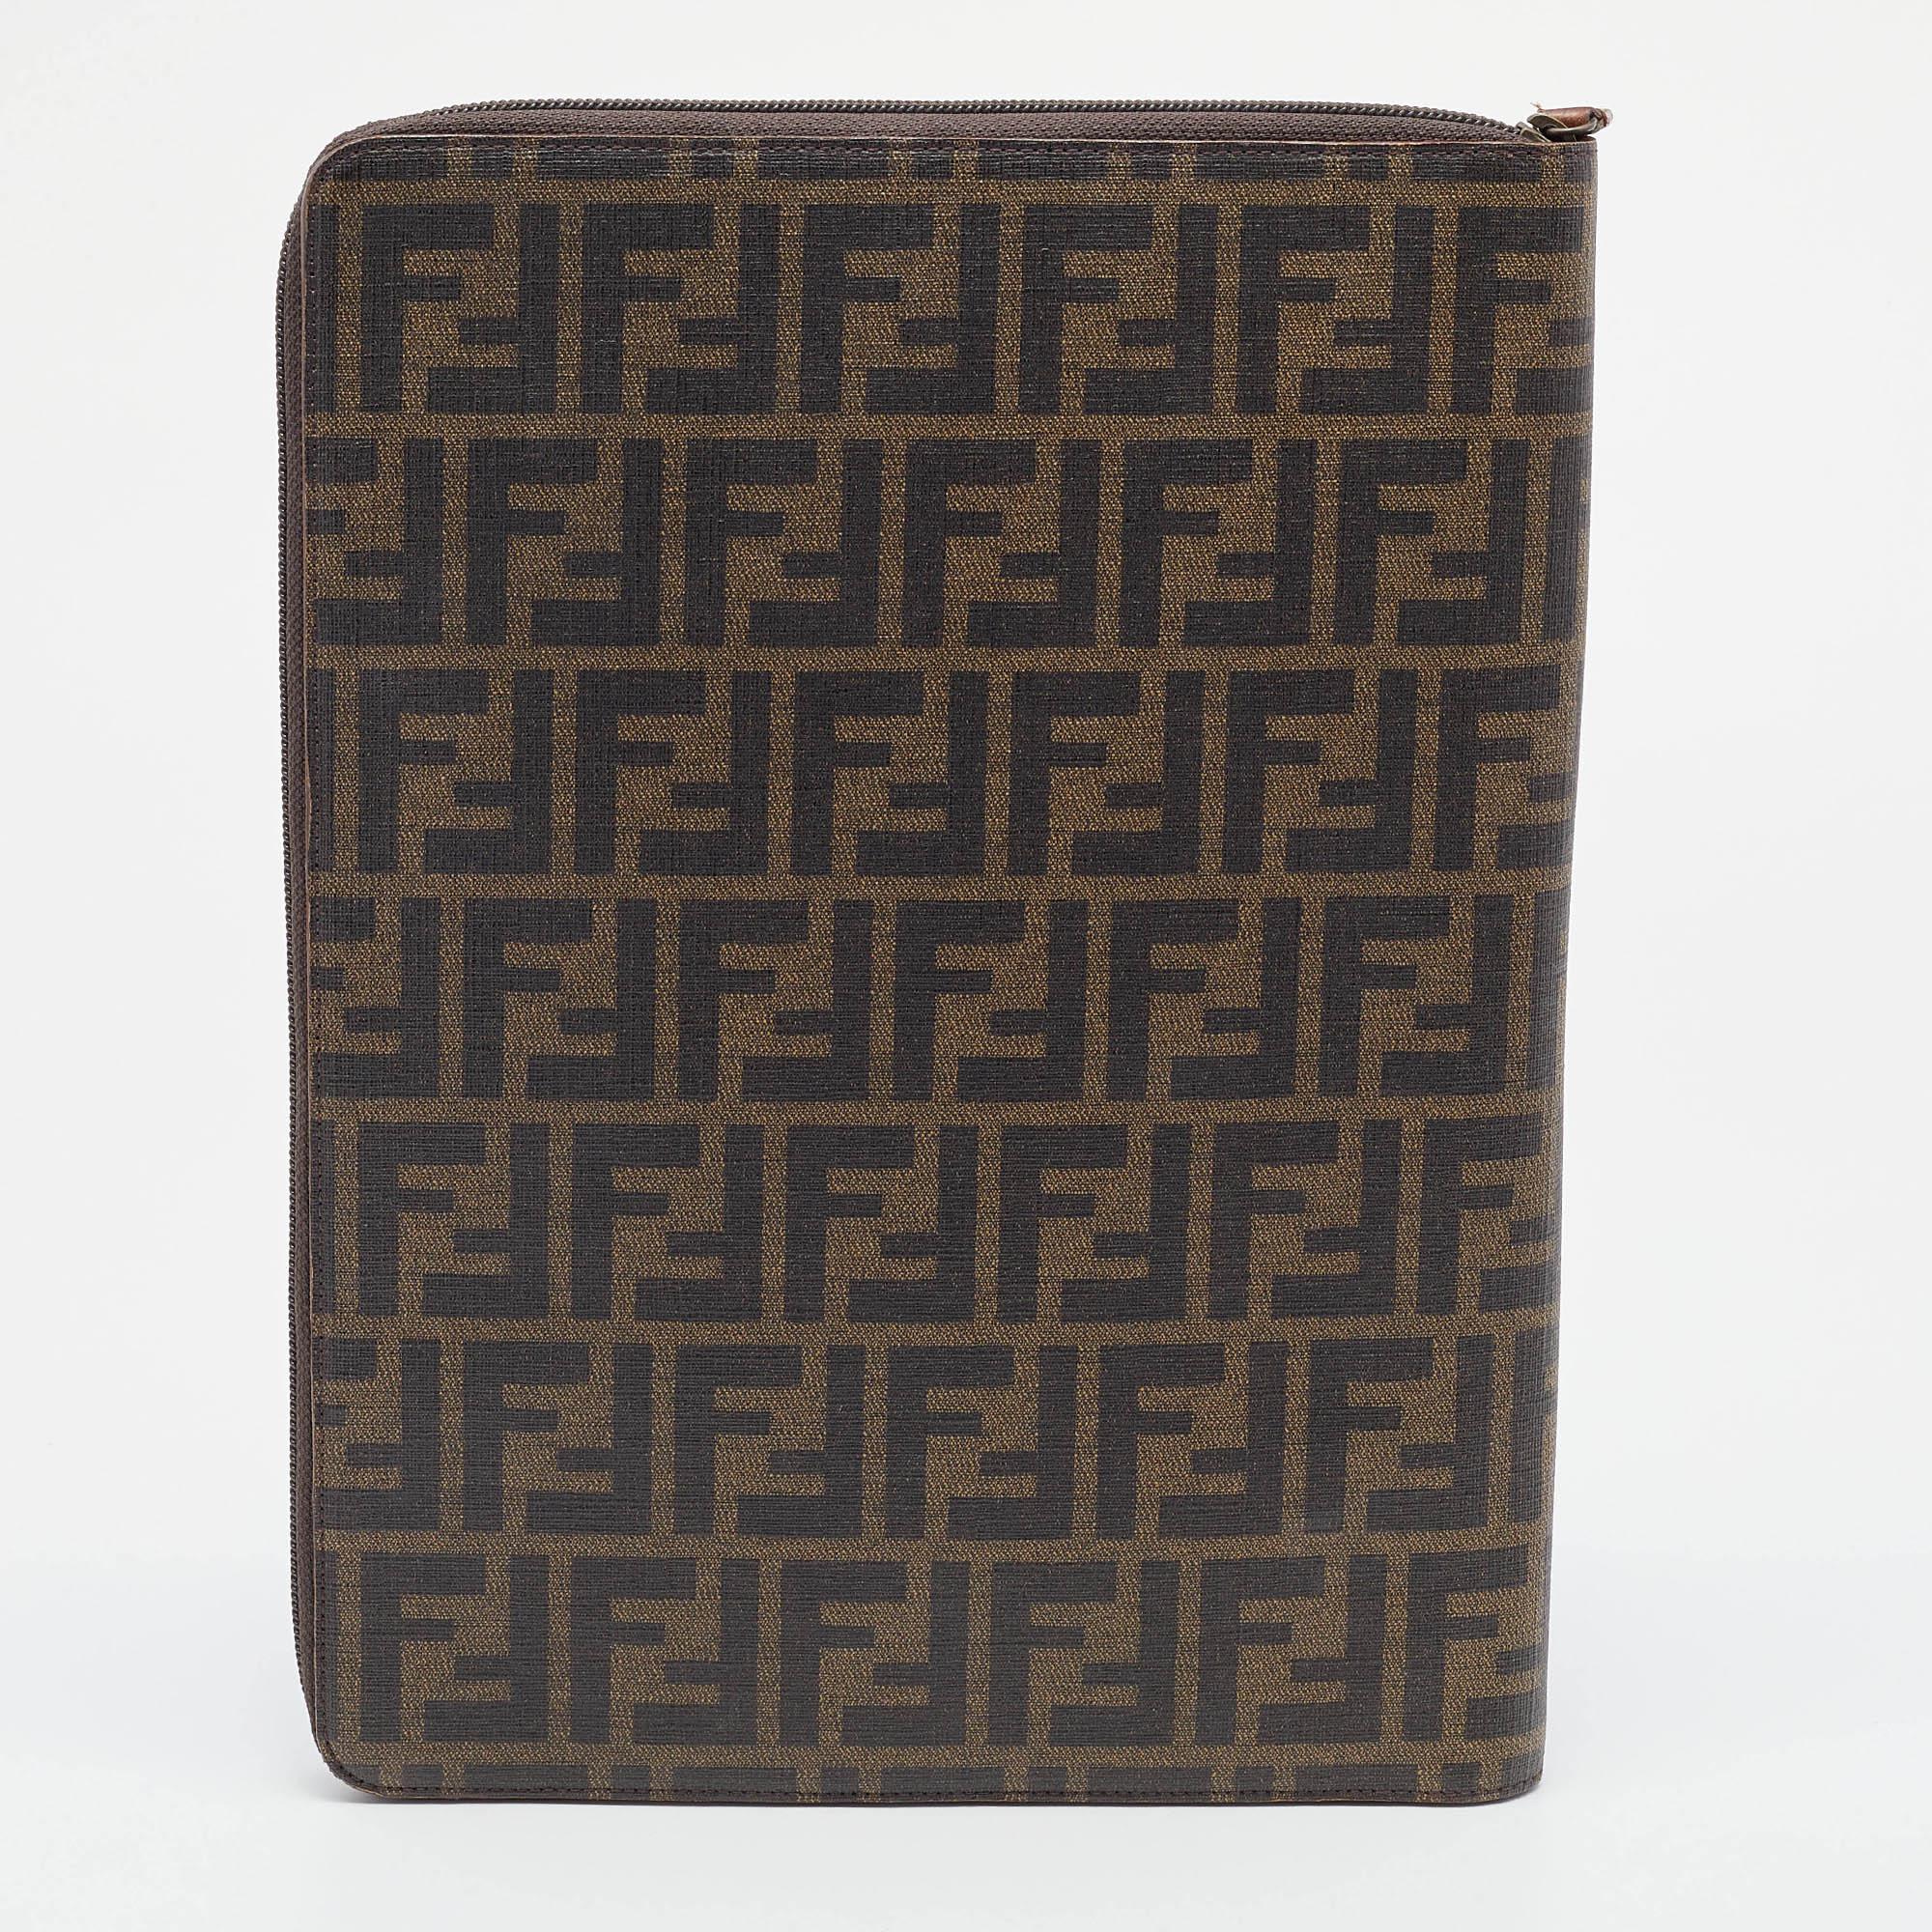 Keep your documents systematically with this Fendi document holder. Created from the signature Zucca coated canvas, it flaunts a zipper closure, gold-tone hardware, and a canvas-lined interior.